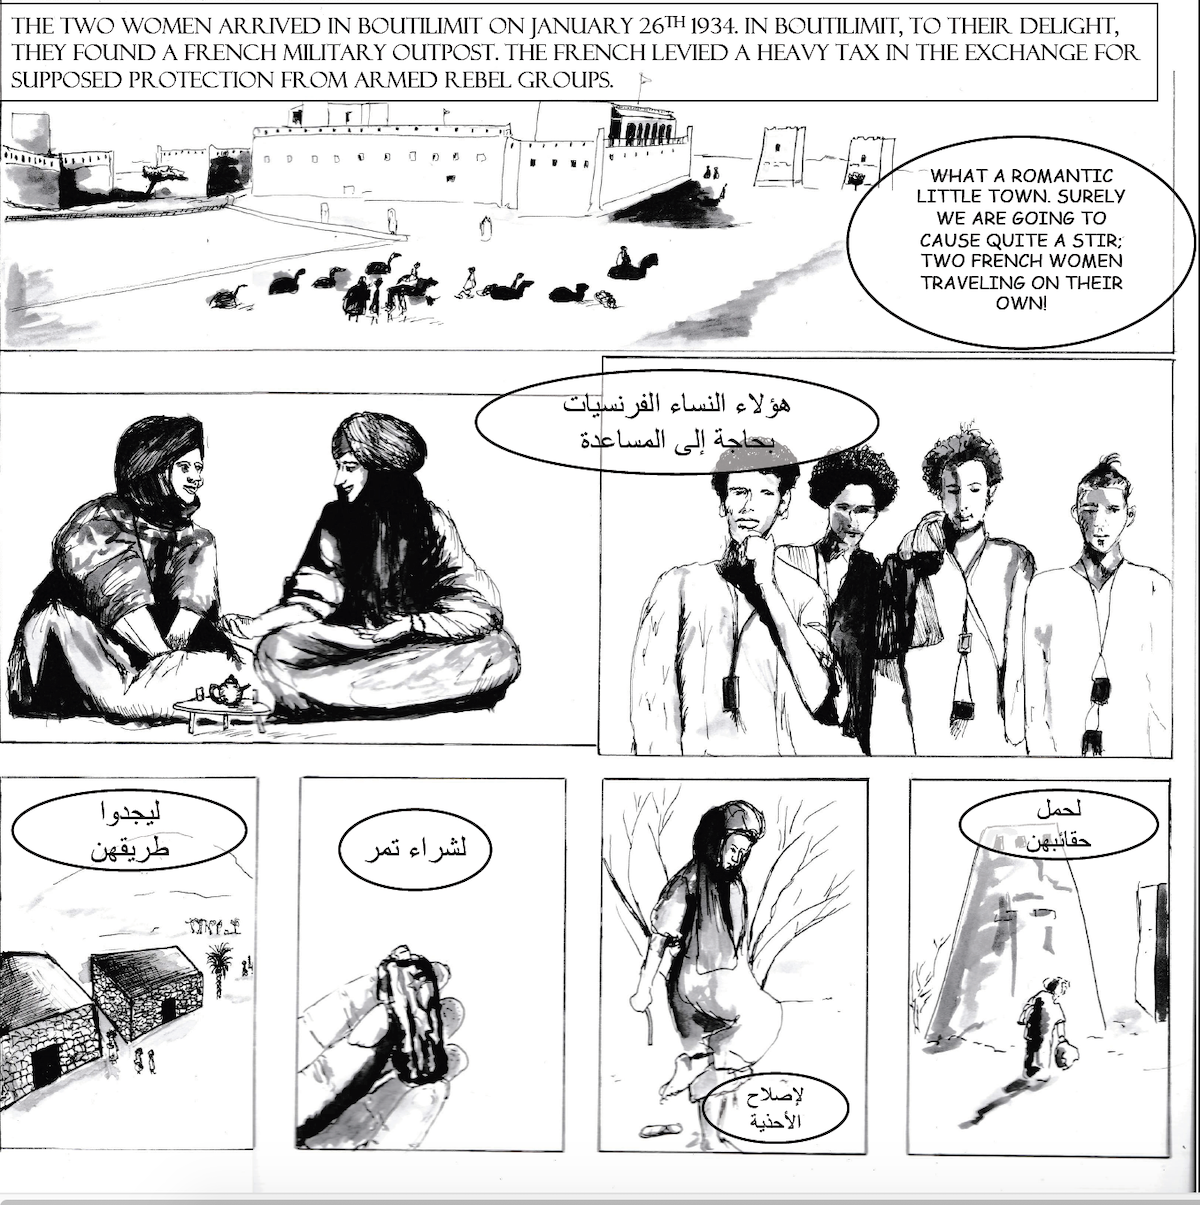 Comics panels show two women in Arab garb speaking English as they approach a Saharan desert town, while following panels show local reaction to them in Arabic.